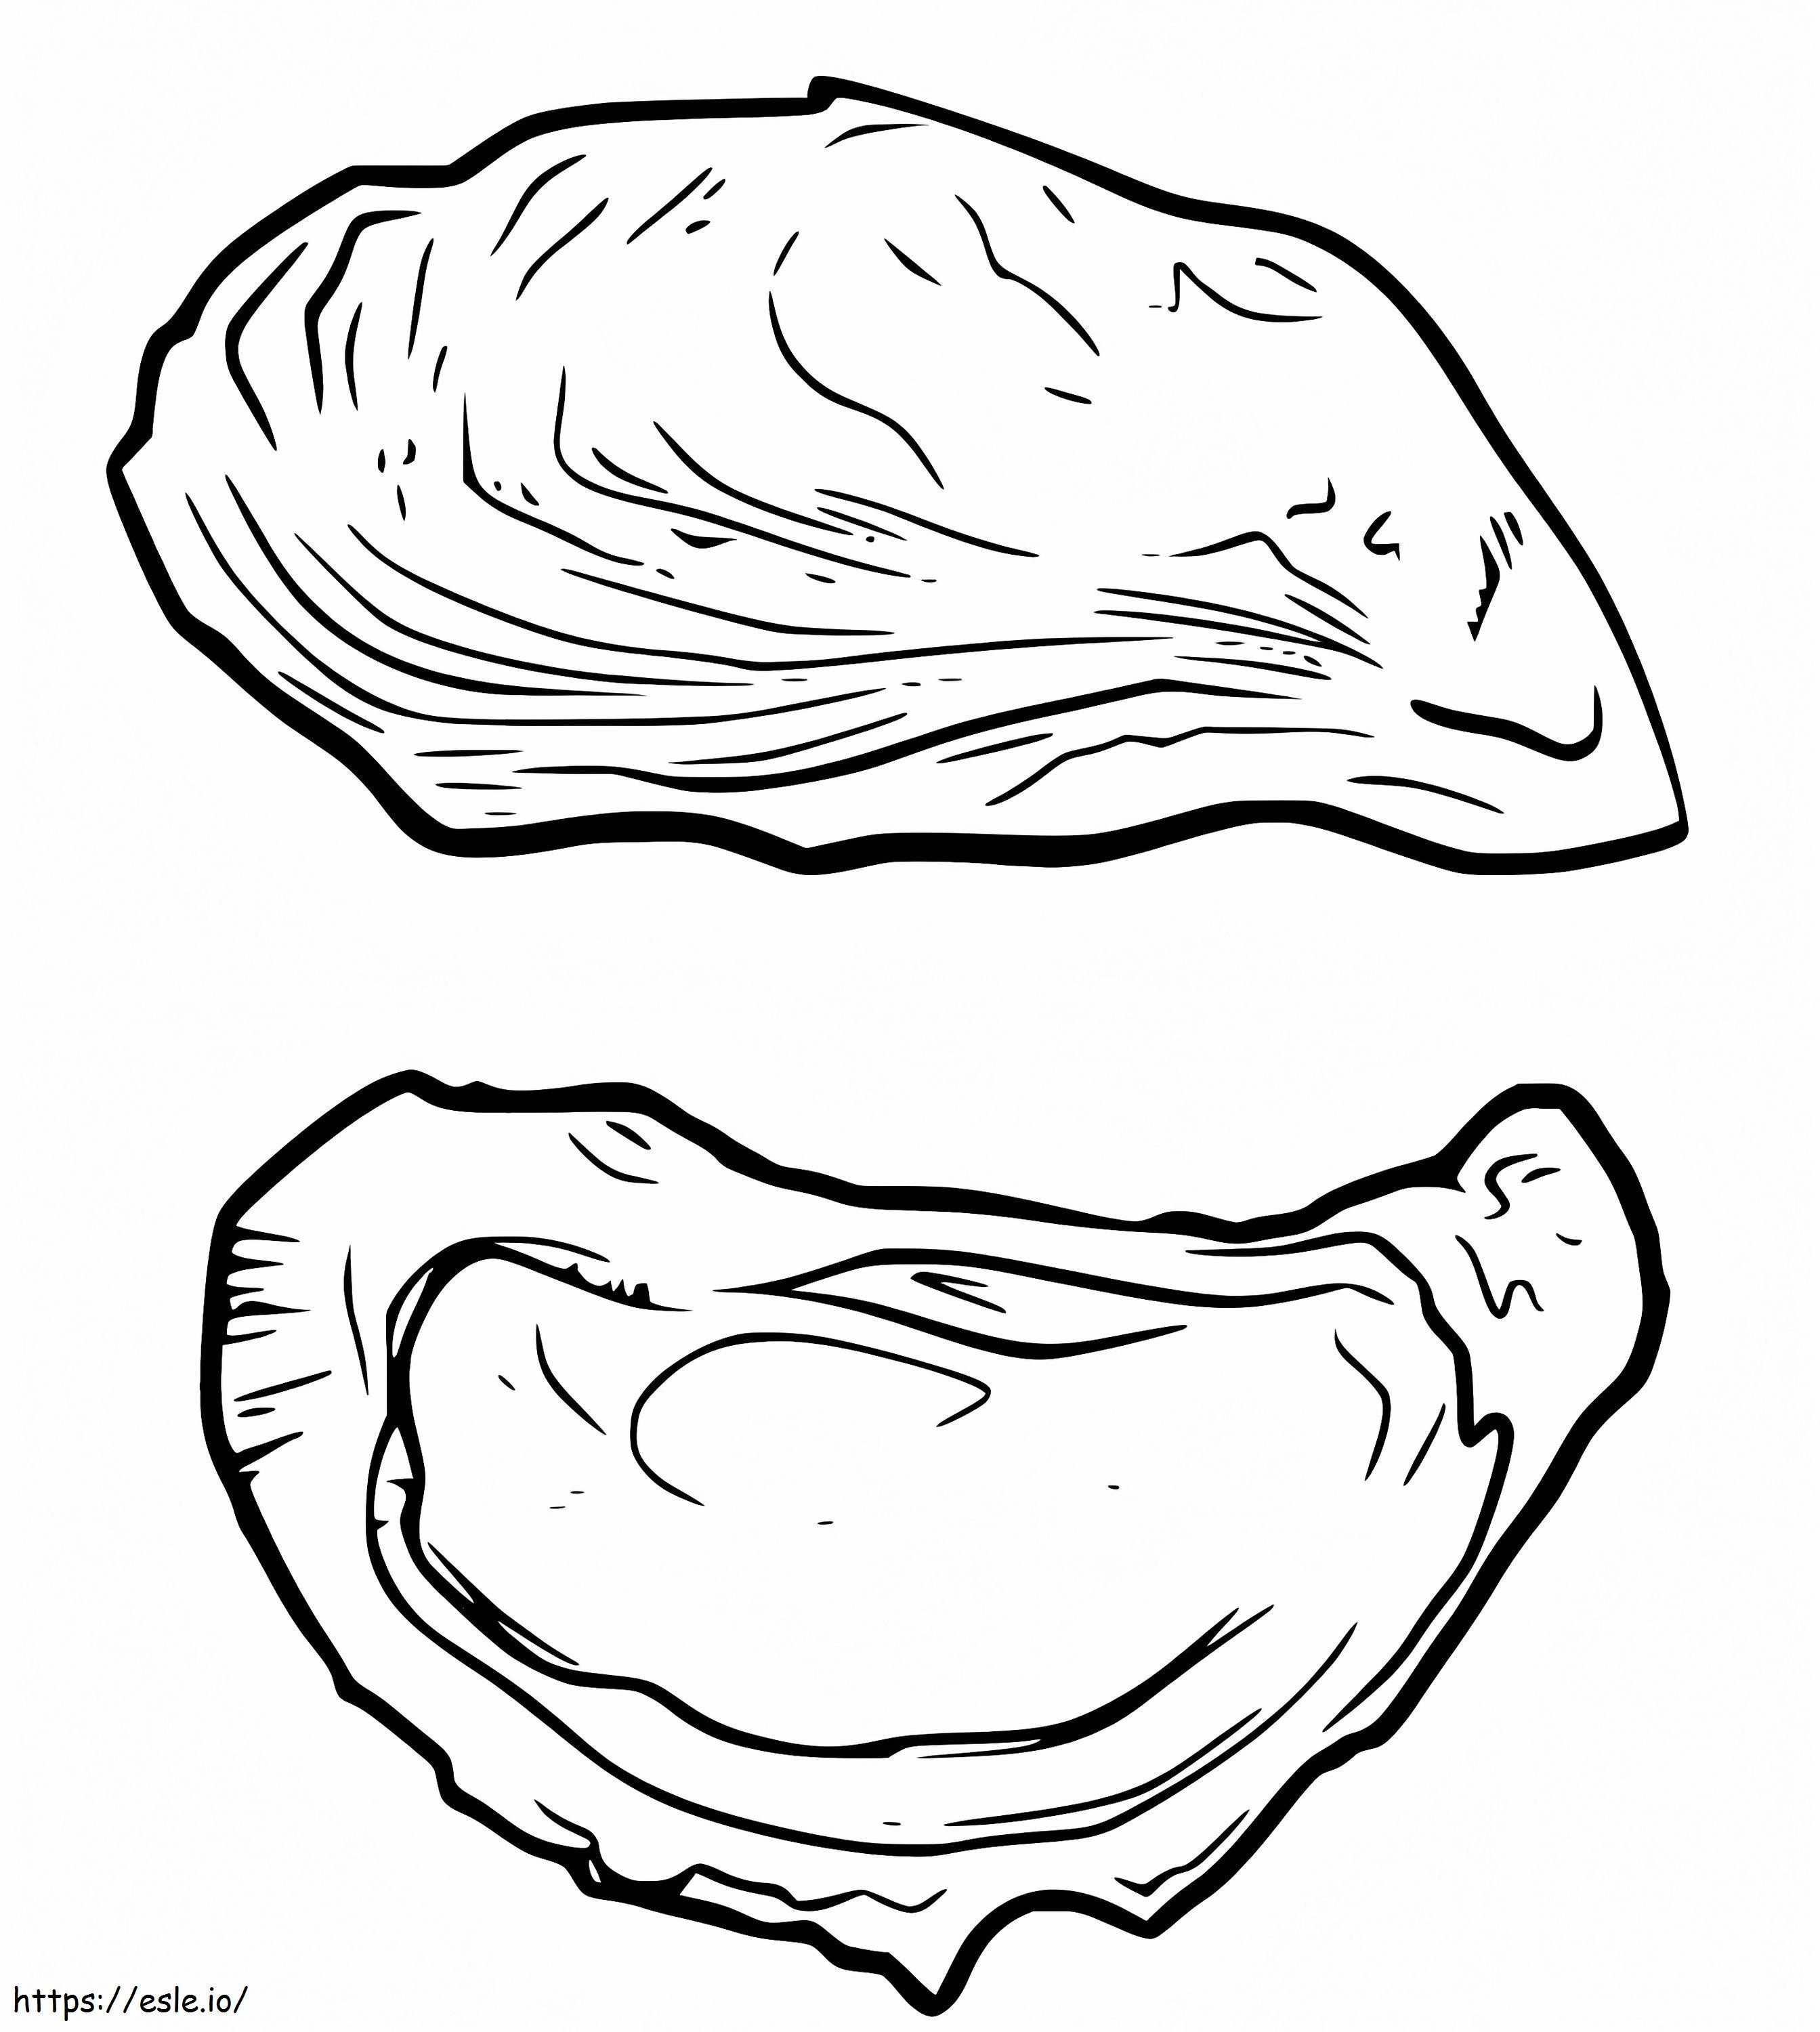 Oyster Shells coloring page